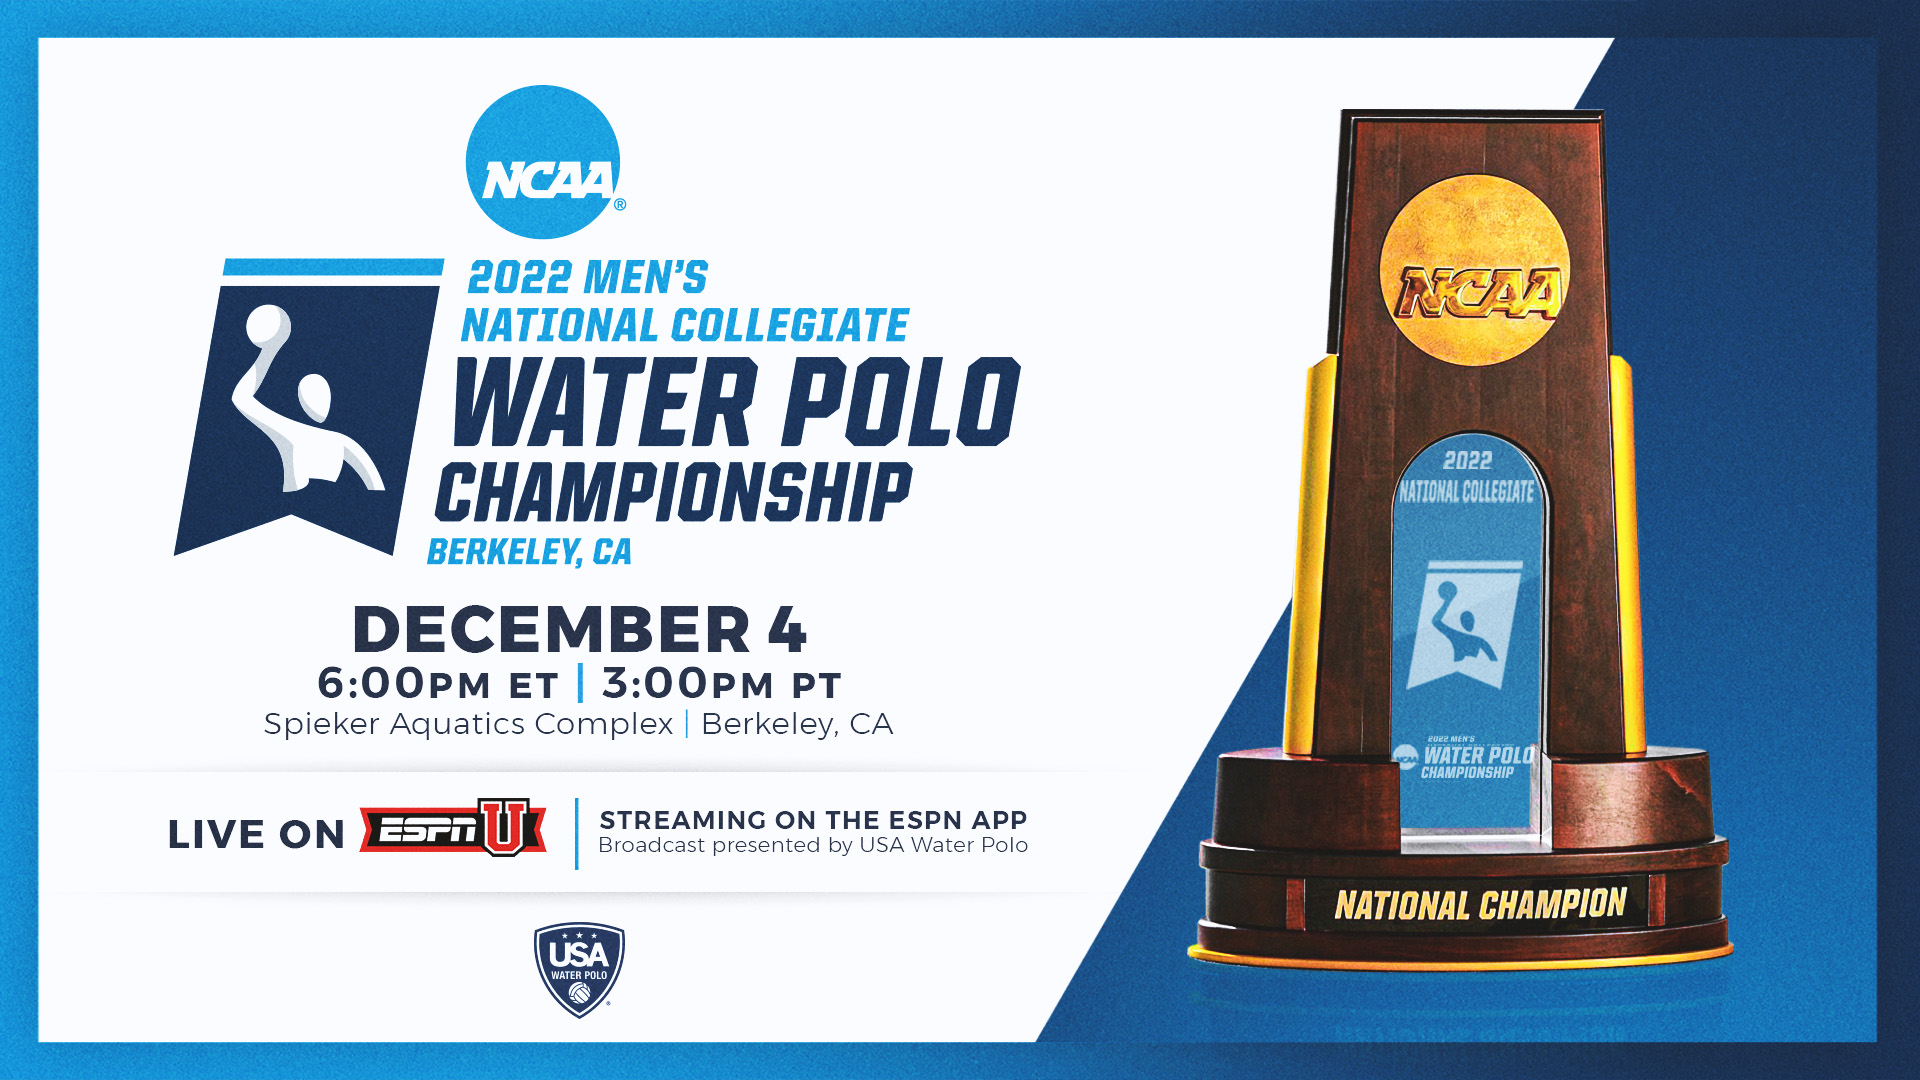 USA Water Polo to Present Live Coverage of 2022 NCAA Mens Water Polo Championships